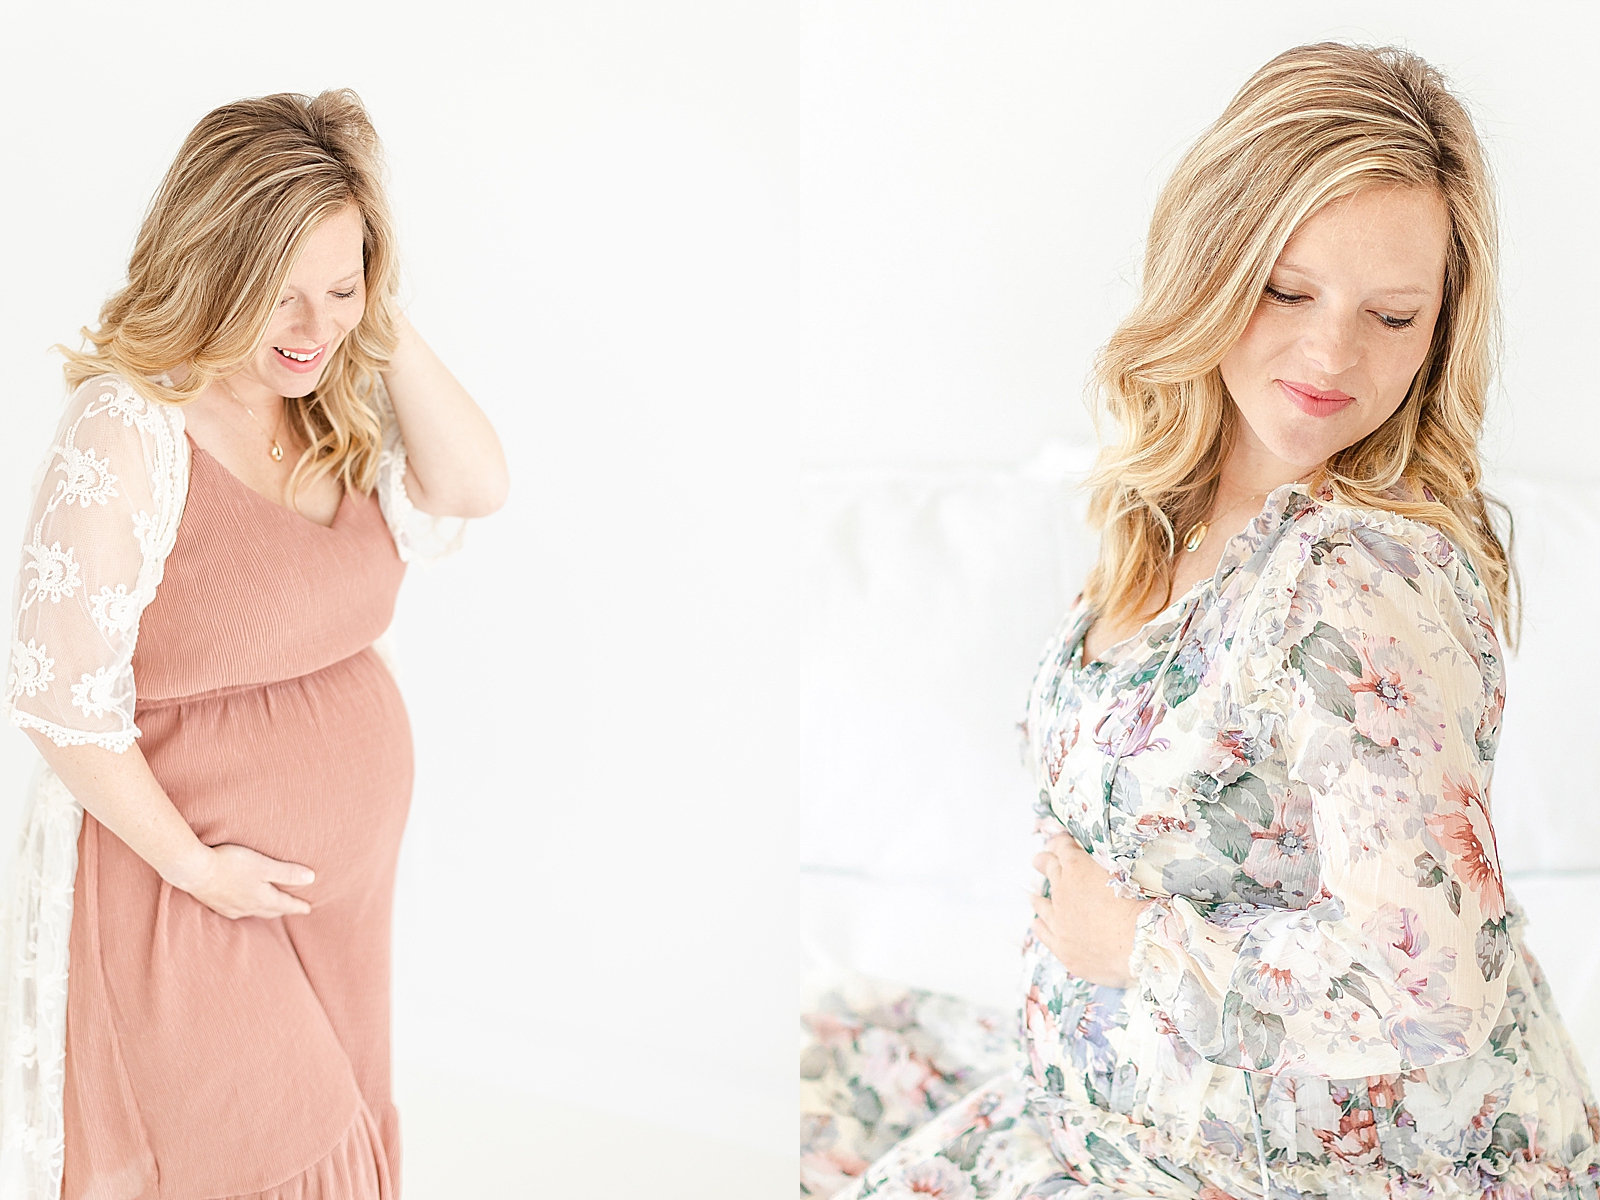 Maternity photos of mom wearing dusty rose dress and floral dress sitting and standing both holding bump